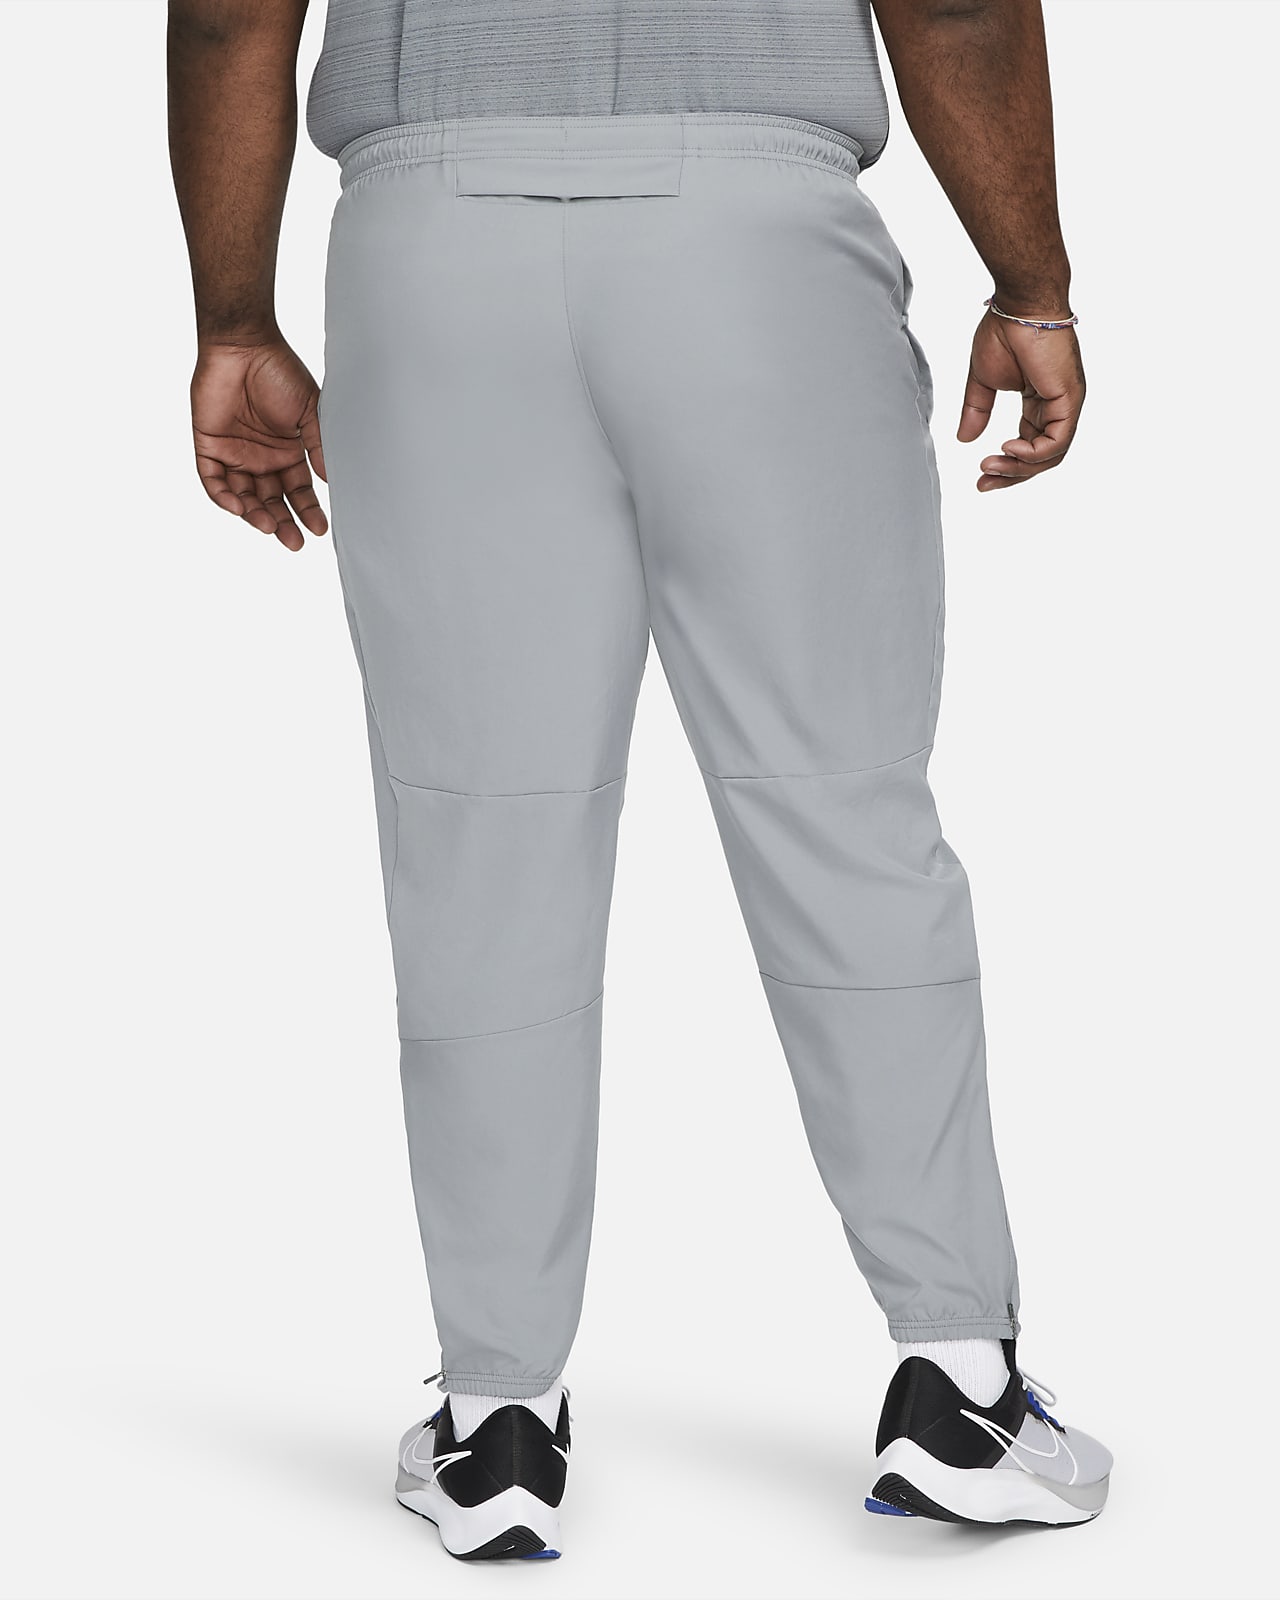 100 Percent Polyester Grey And White Lining Boys Track Pants, Washable Or  Quick Dry Age Group: Children at Best Price in Shikohabad | Rafels G Uniform